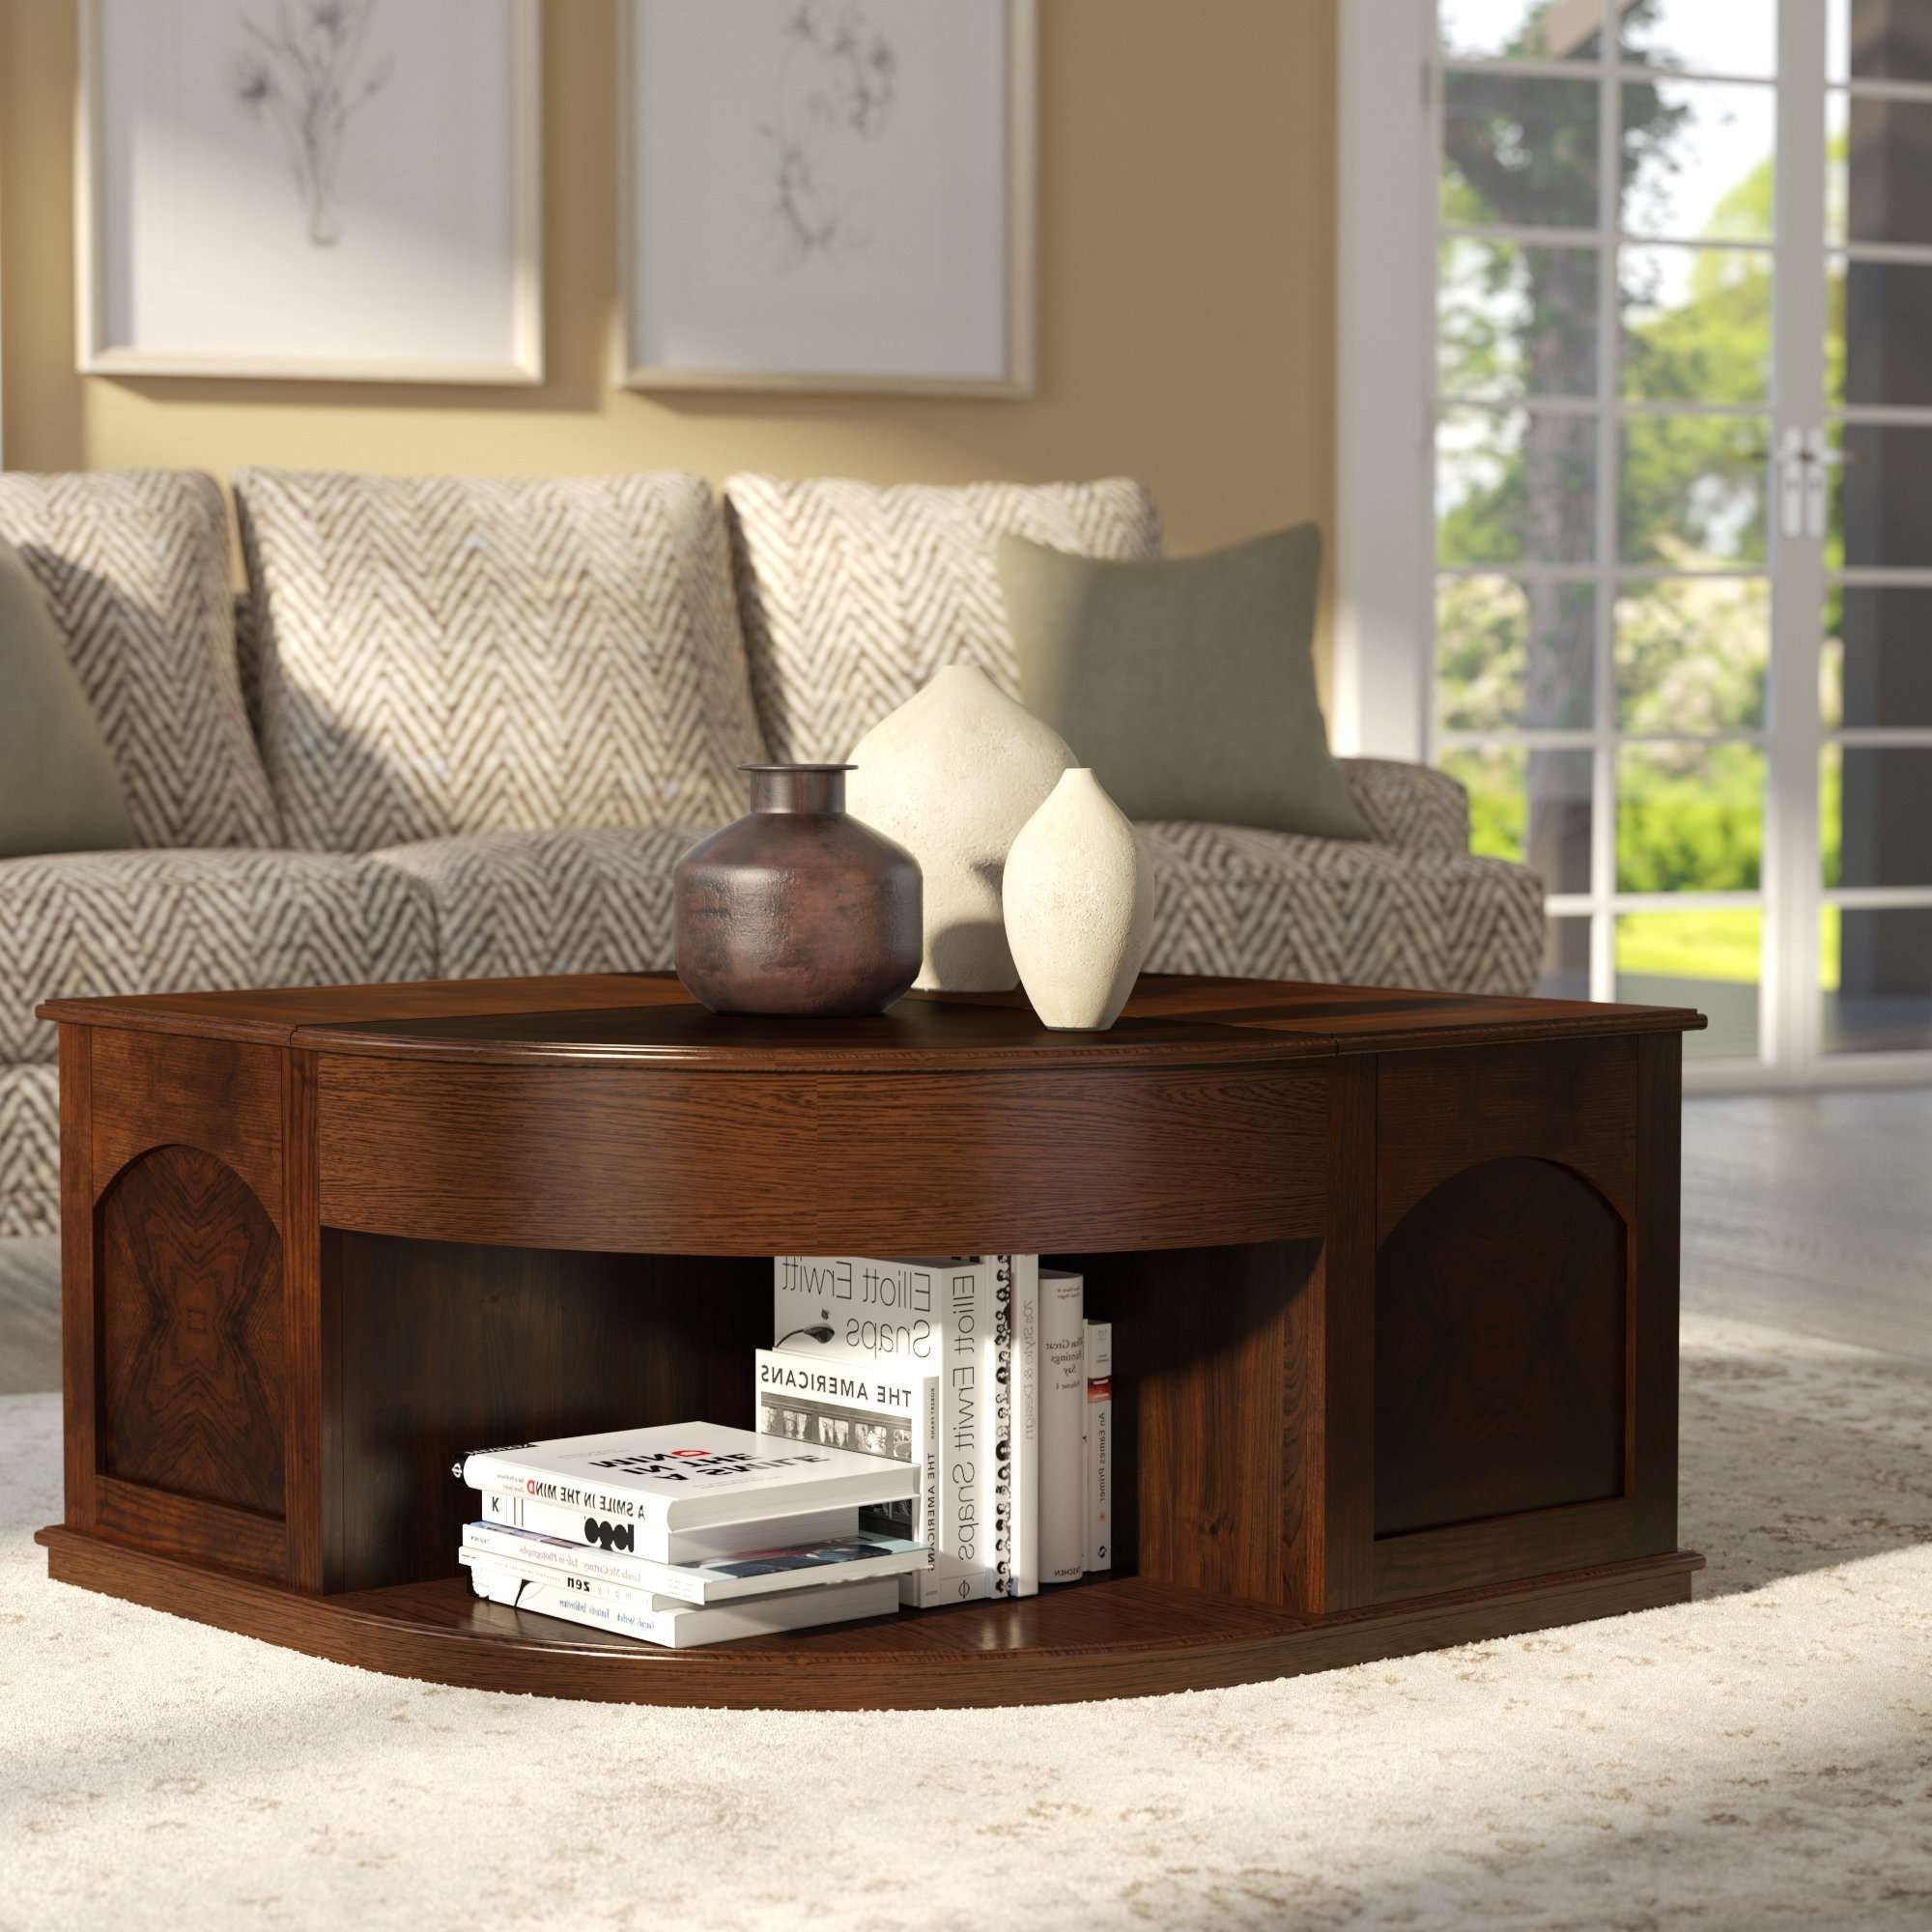 Darby Home Co Wilhoite Double Lift Top Coffee Table & Reviews Within Best And Newest Lift Top Coffee Tables (View 15 of 20)